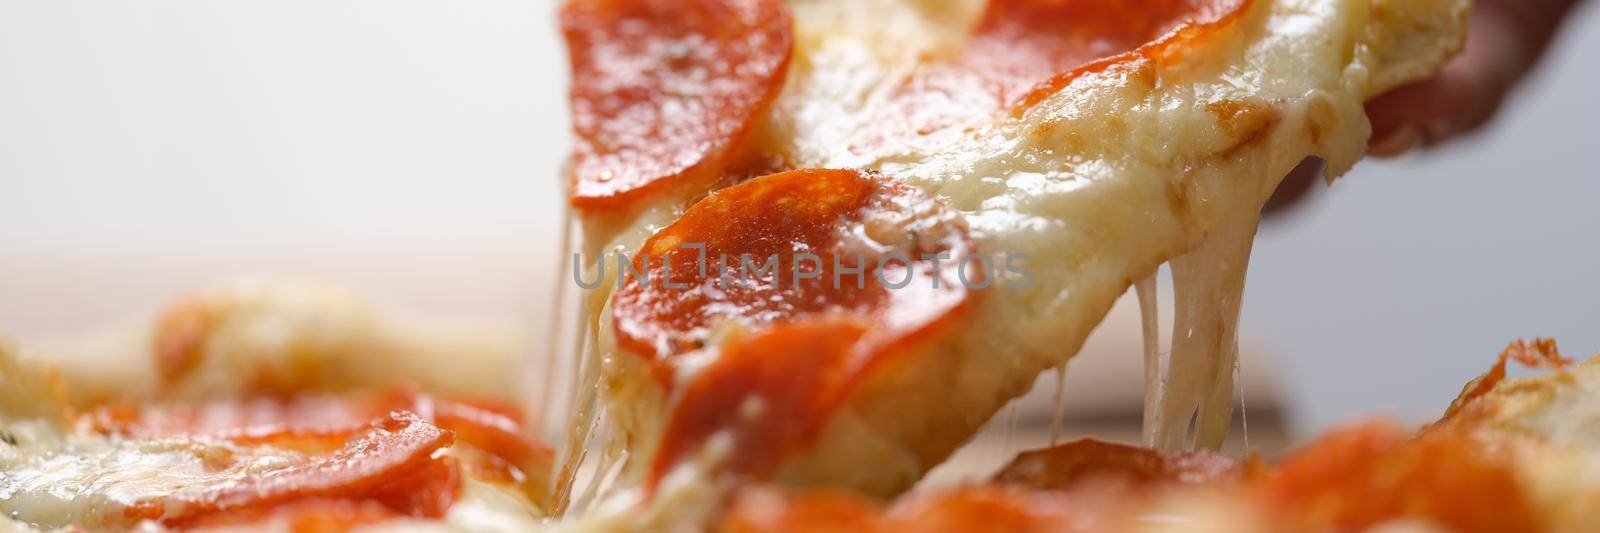 Slice of juicy fresh hot pizza is taken out of box. Pizza delivery concept